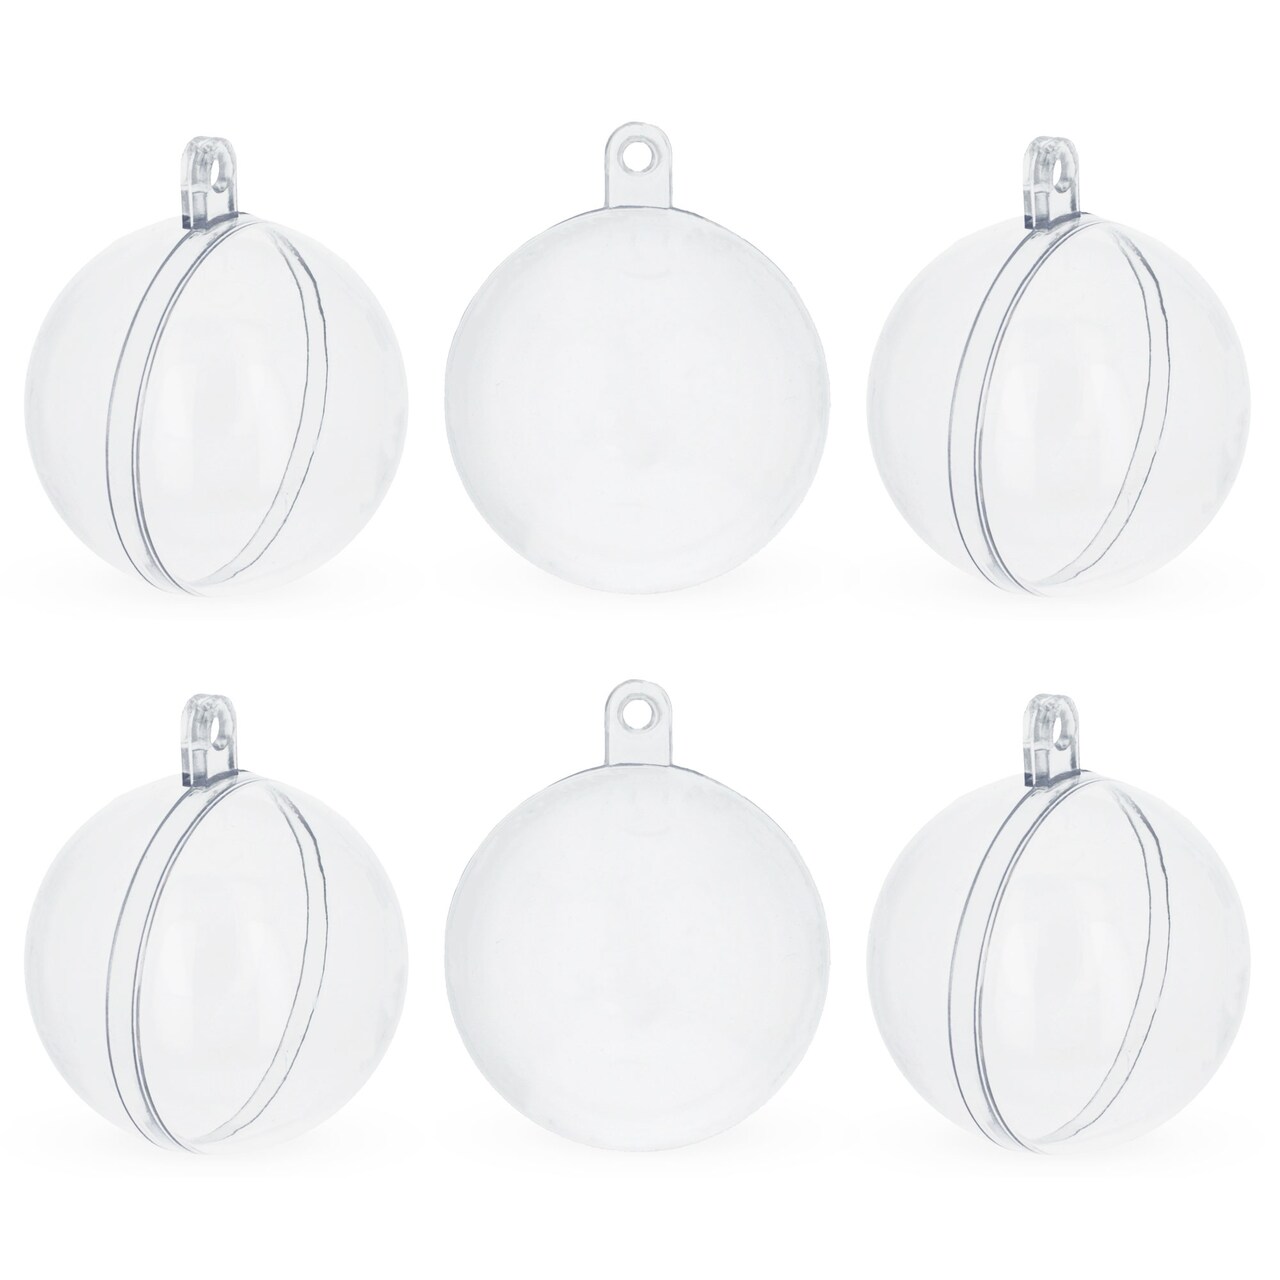 Set of 6 Clear Plastic Ball Ornaments 1.92 Inches (49 mm)